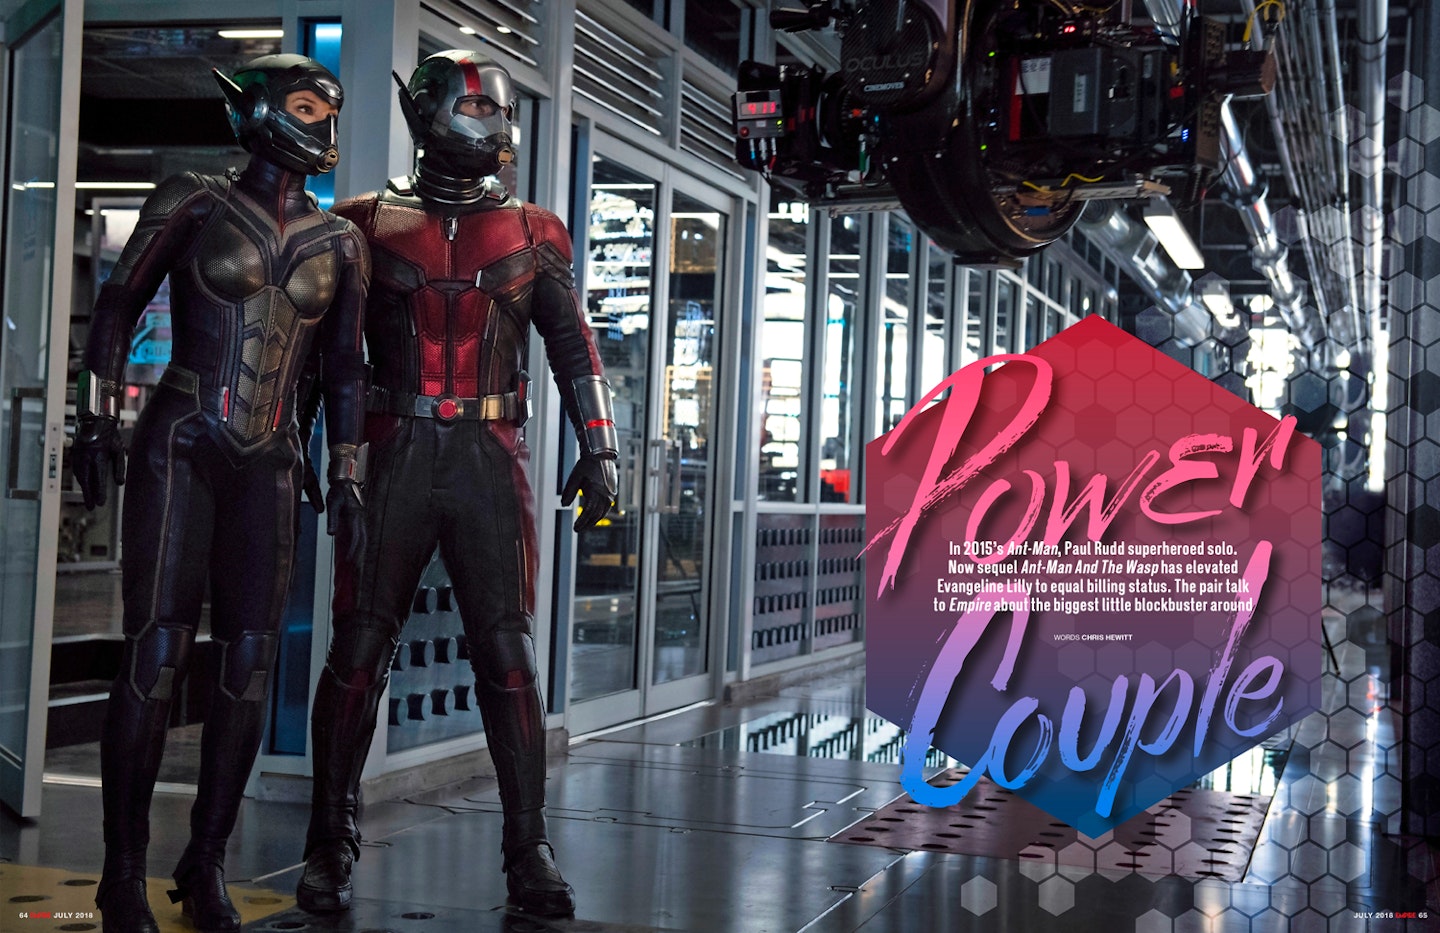 Empire July 2018 - Ant-Man and the Wasp